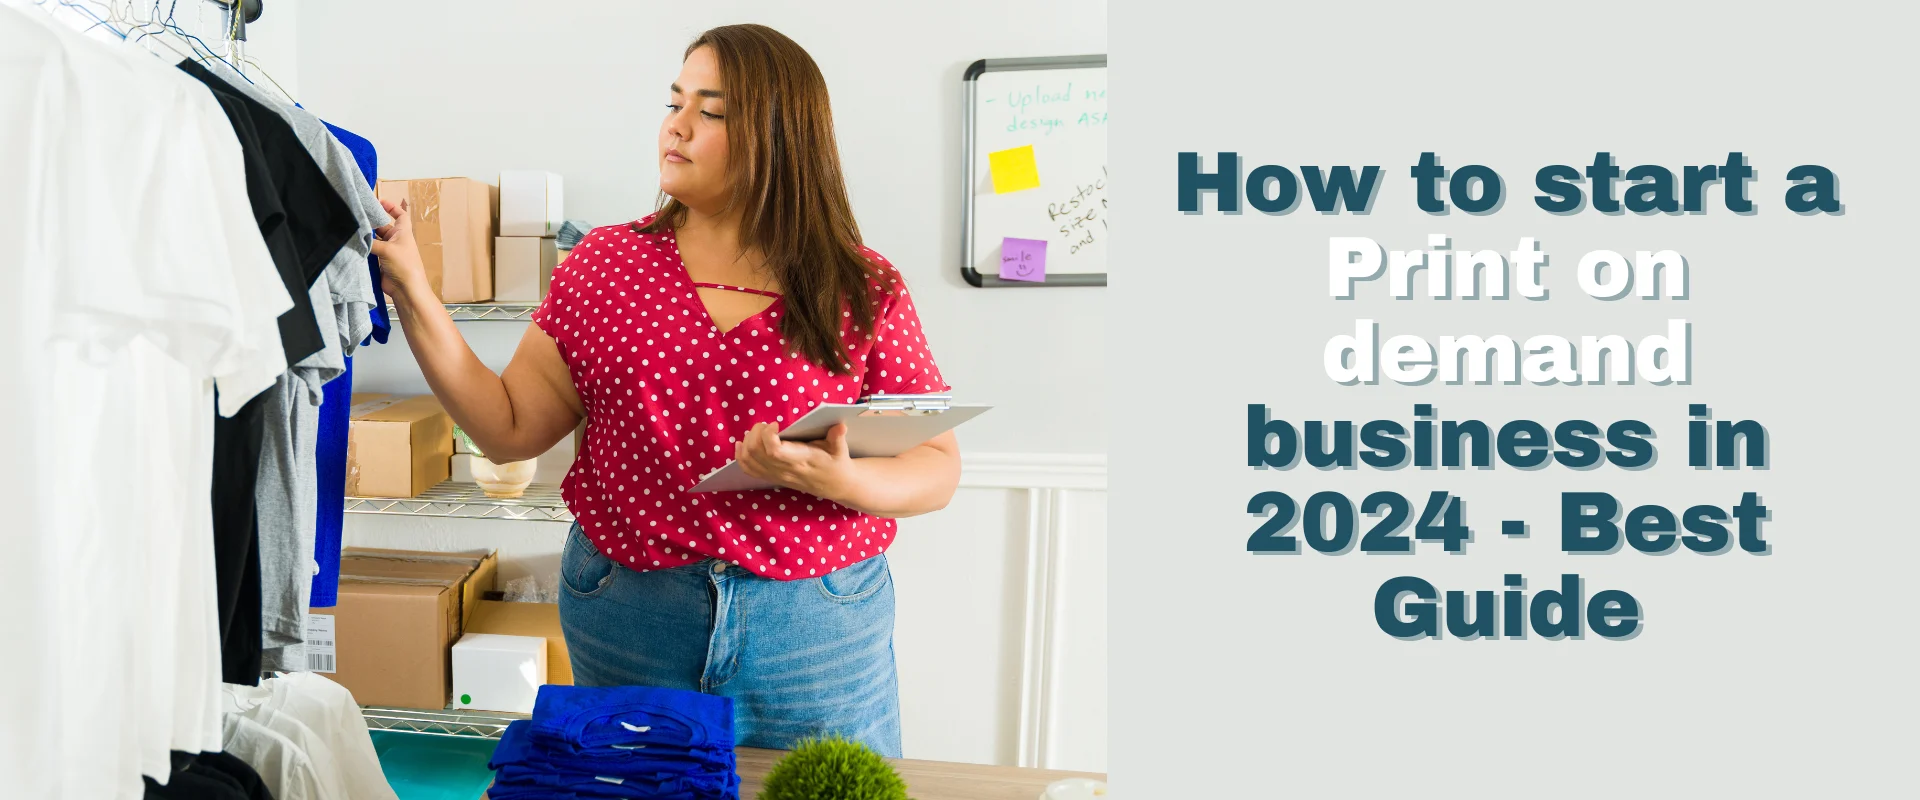 How to start a Print on demand business in 2024 – Best Guide